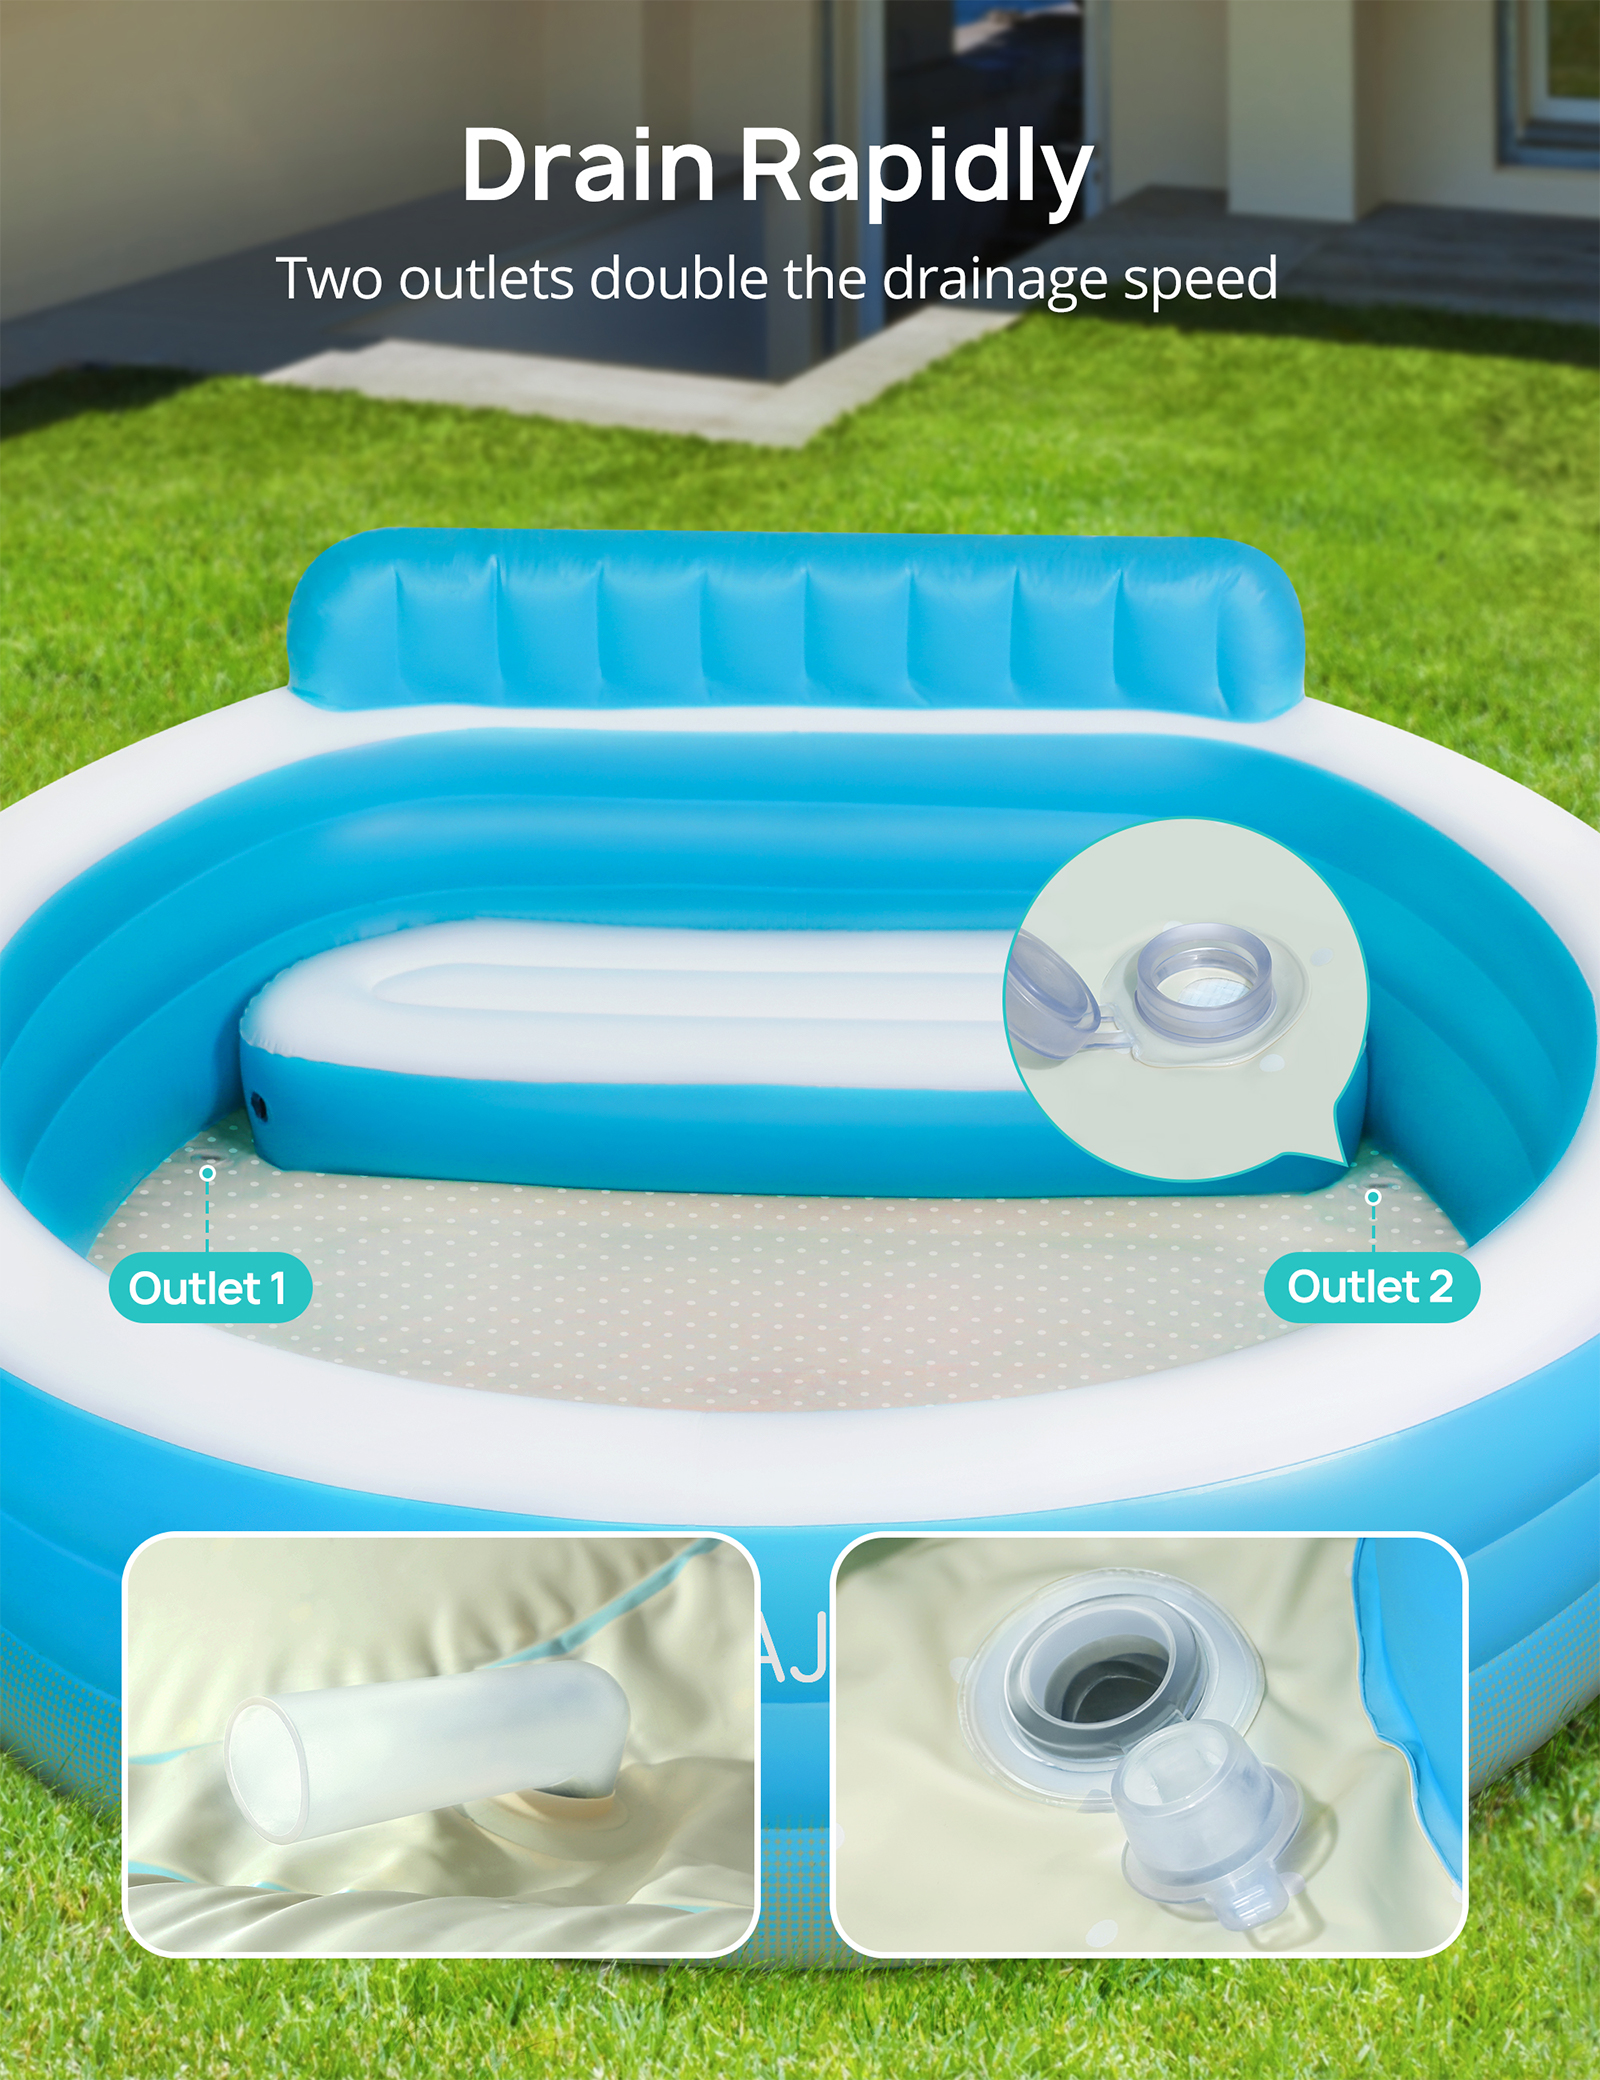 Evajoy Inflatable Pool, Family Lounge Swimming Pool with Seat for Kids Aldult, Round, 7.33 x 7.11 x 2.5 ft - image 3 of 11